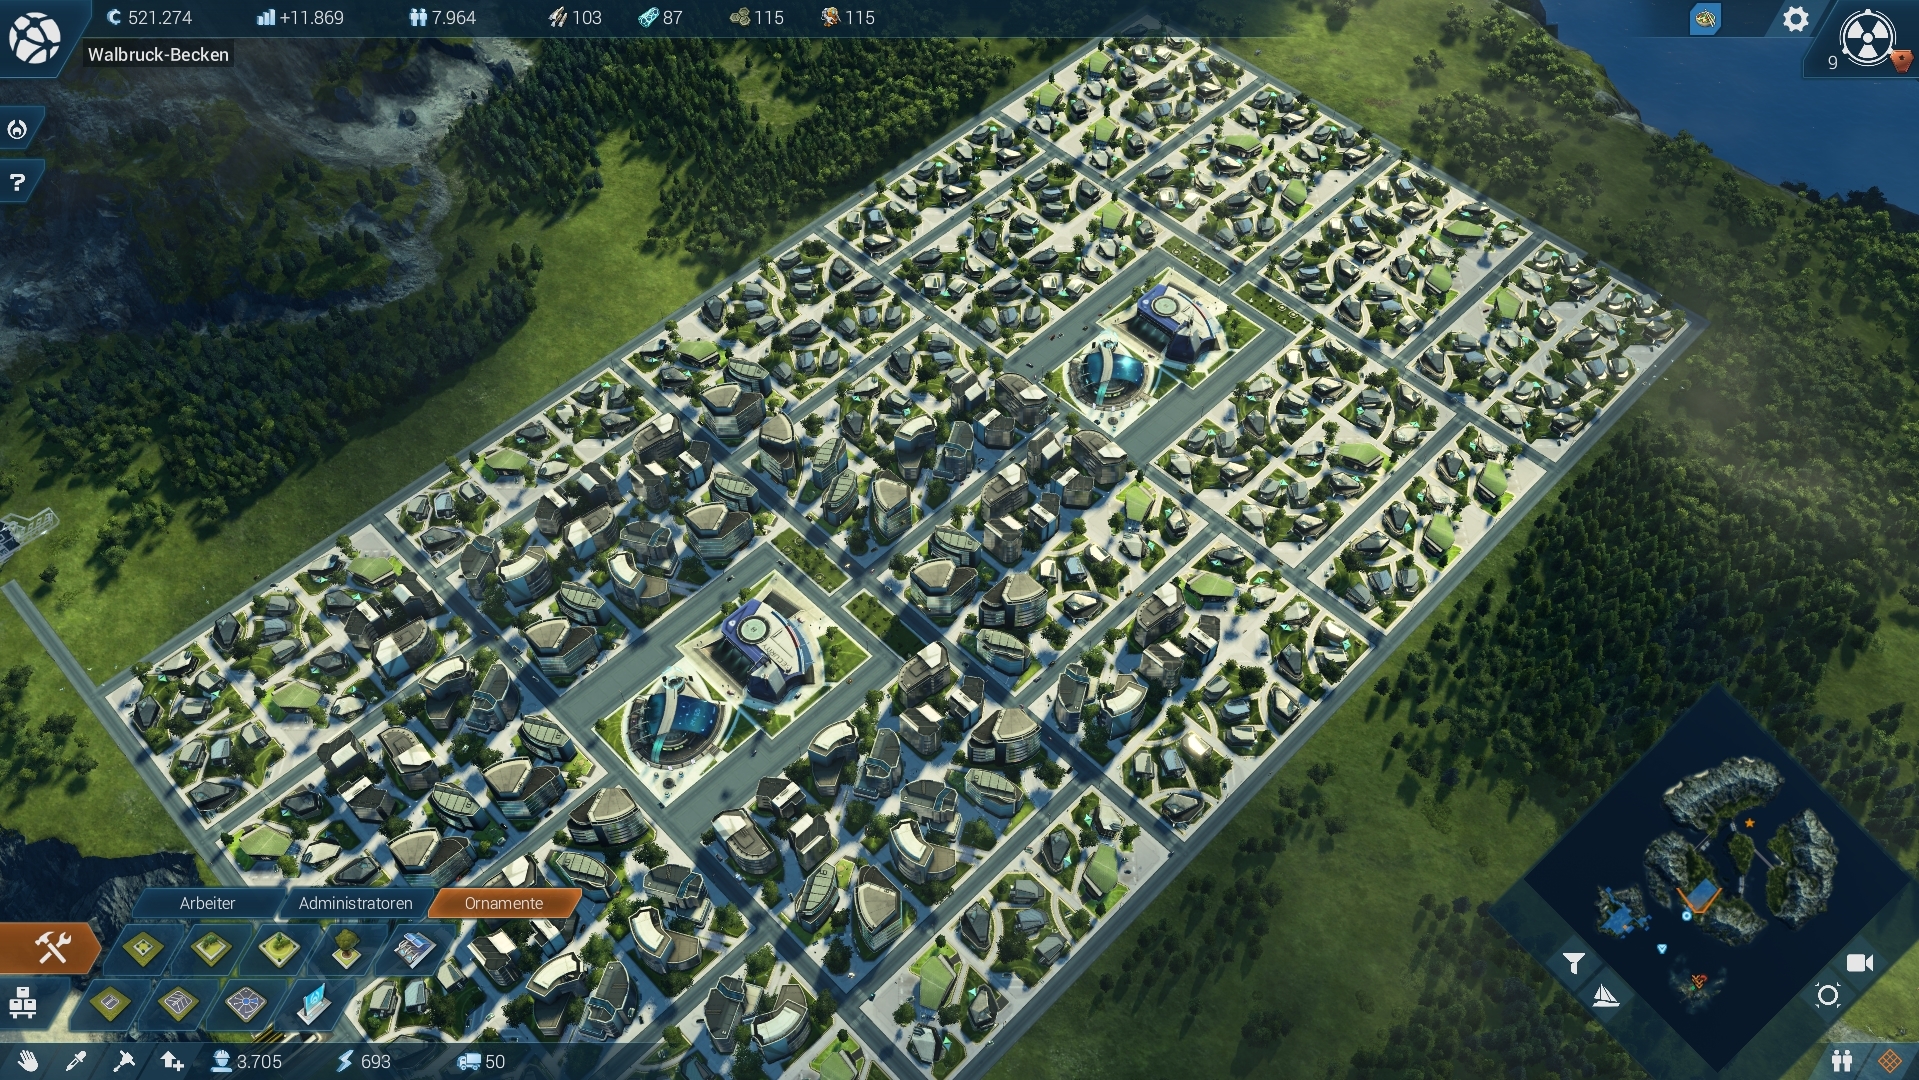 anno 2070 city layout